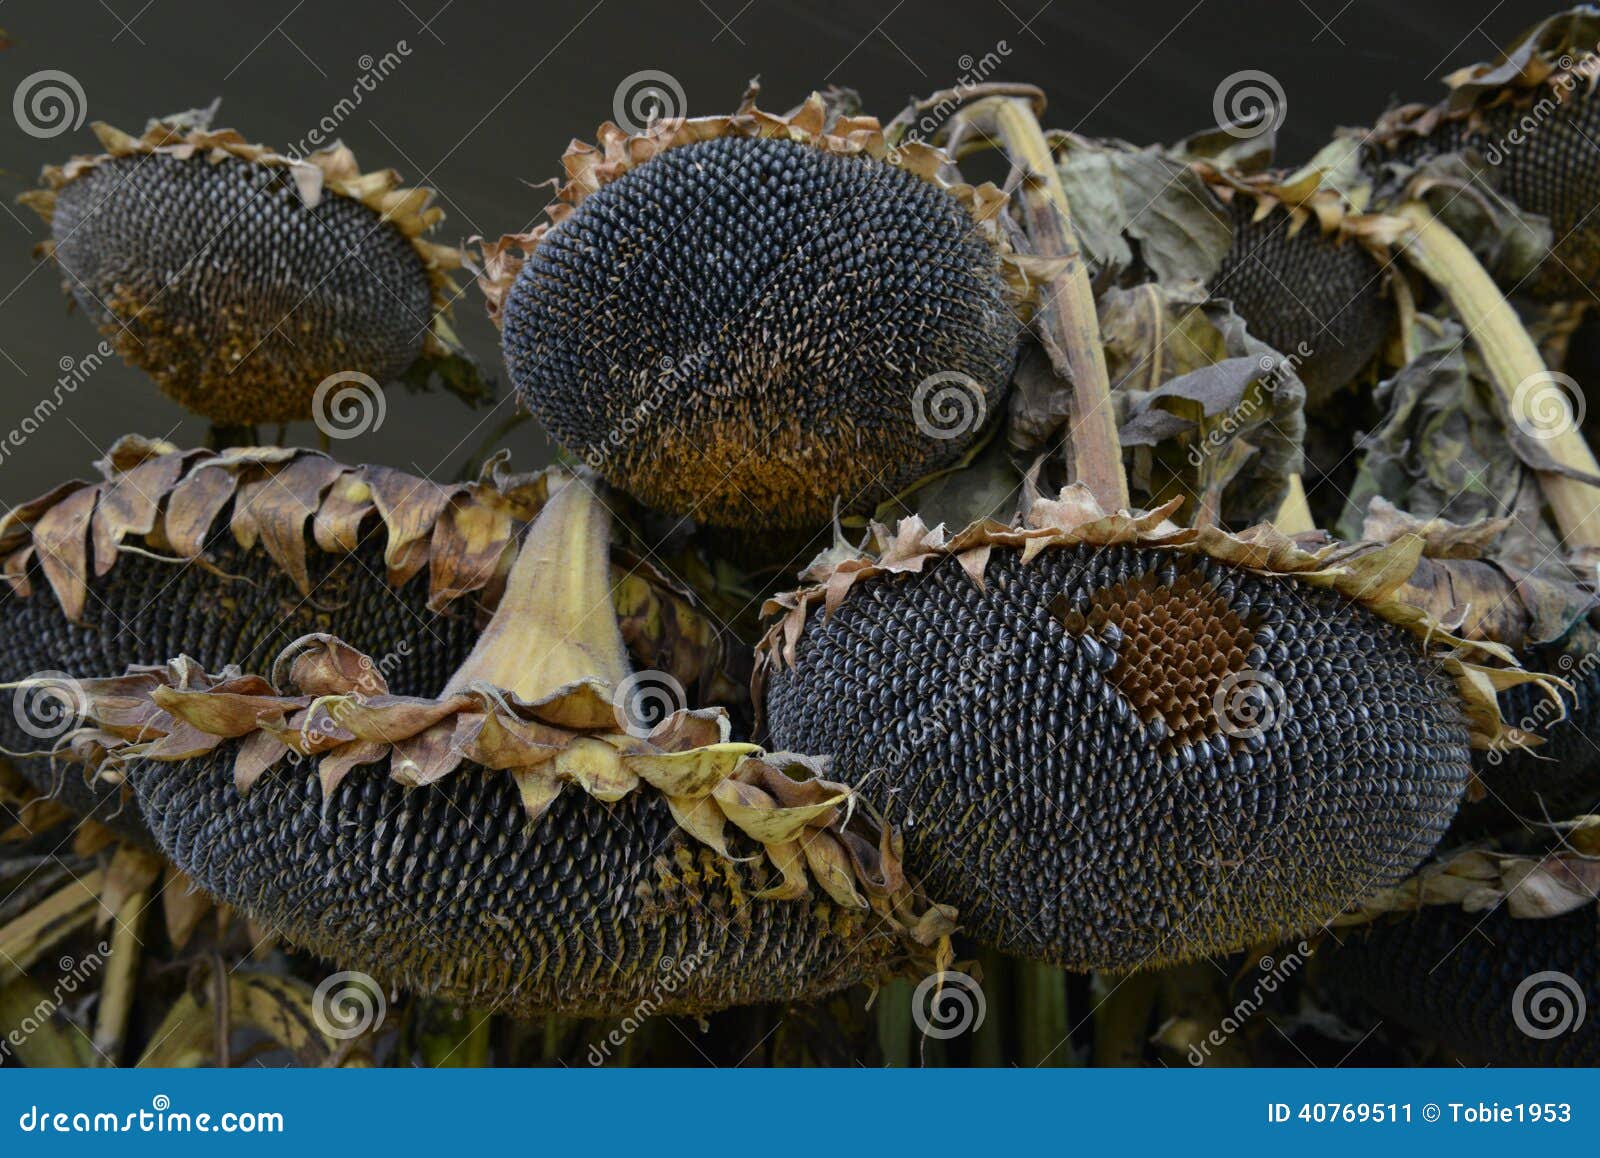 Sunflower Seeds on Plant at Agricultural Show Stock Image - Image of ...